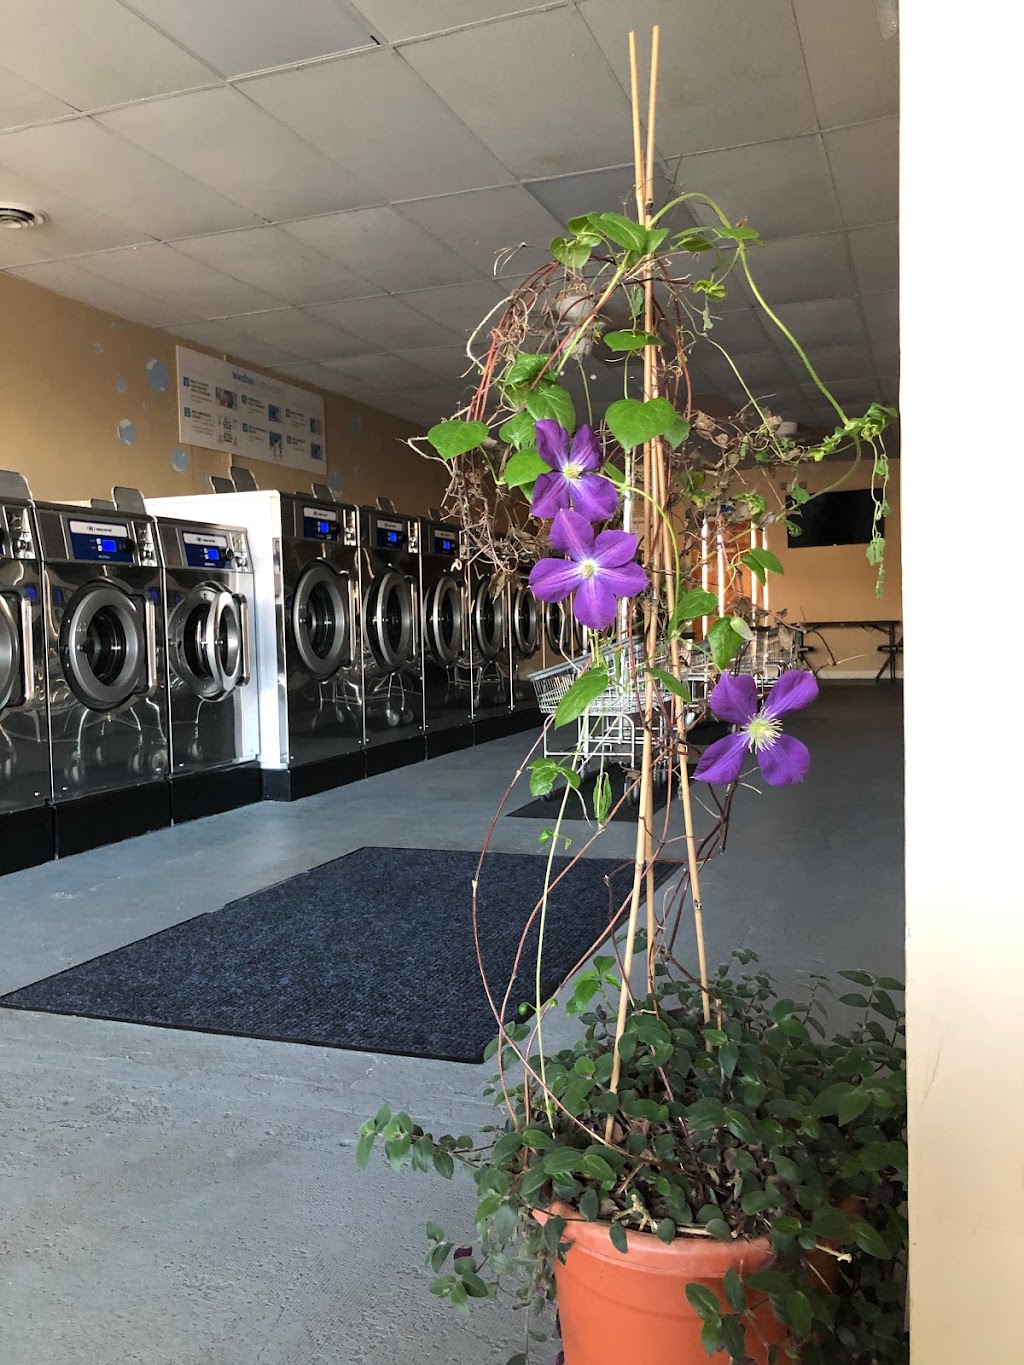 Clean Wave Laundromat | 429 Schuylkill Rd, Phoenixville, PA 19460, USA | Phone: (484) 924-9391